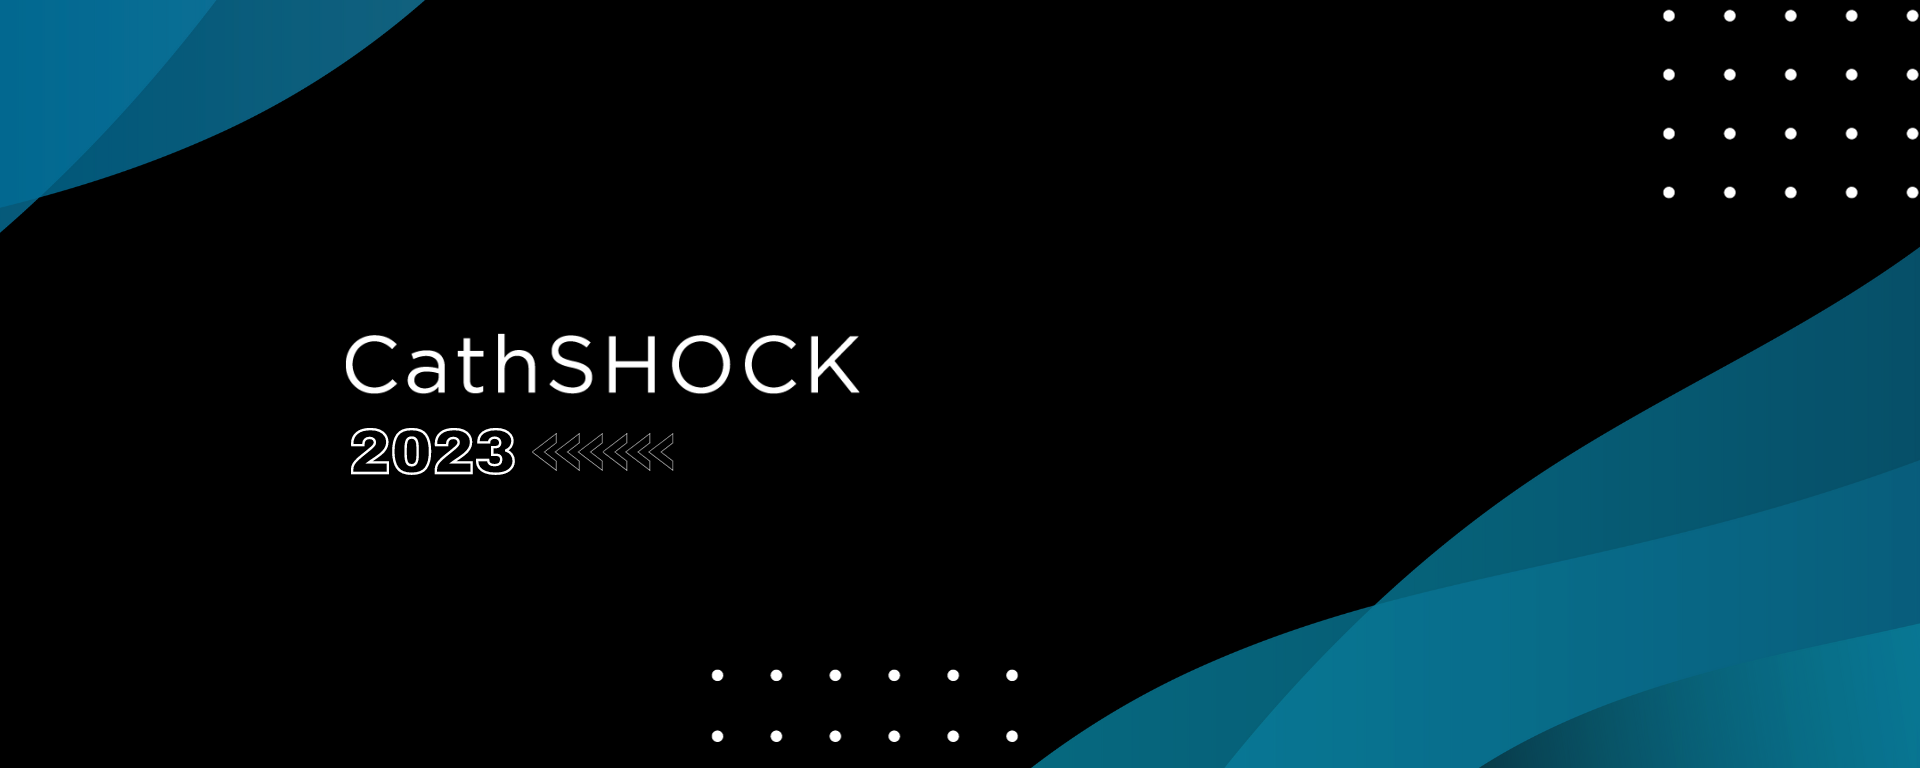 Cathshock 2023 on a black background with blue graphic elements